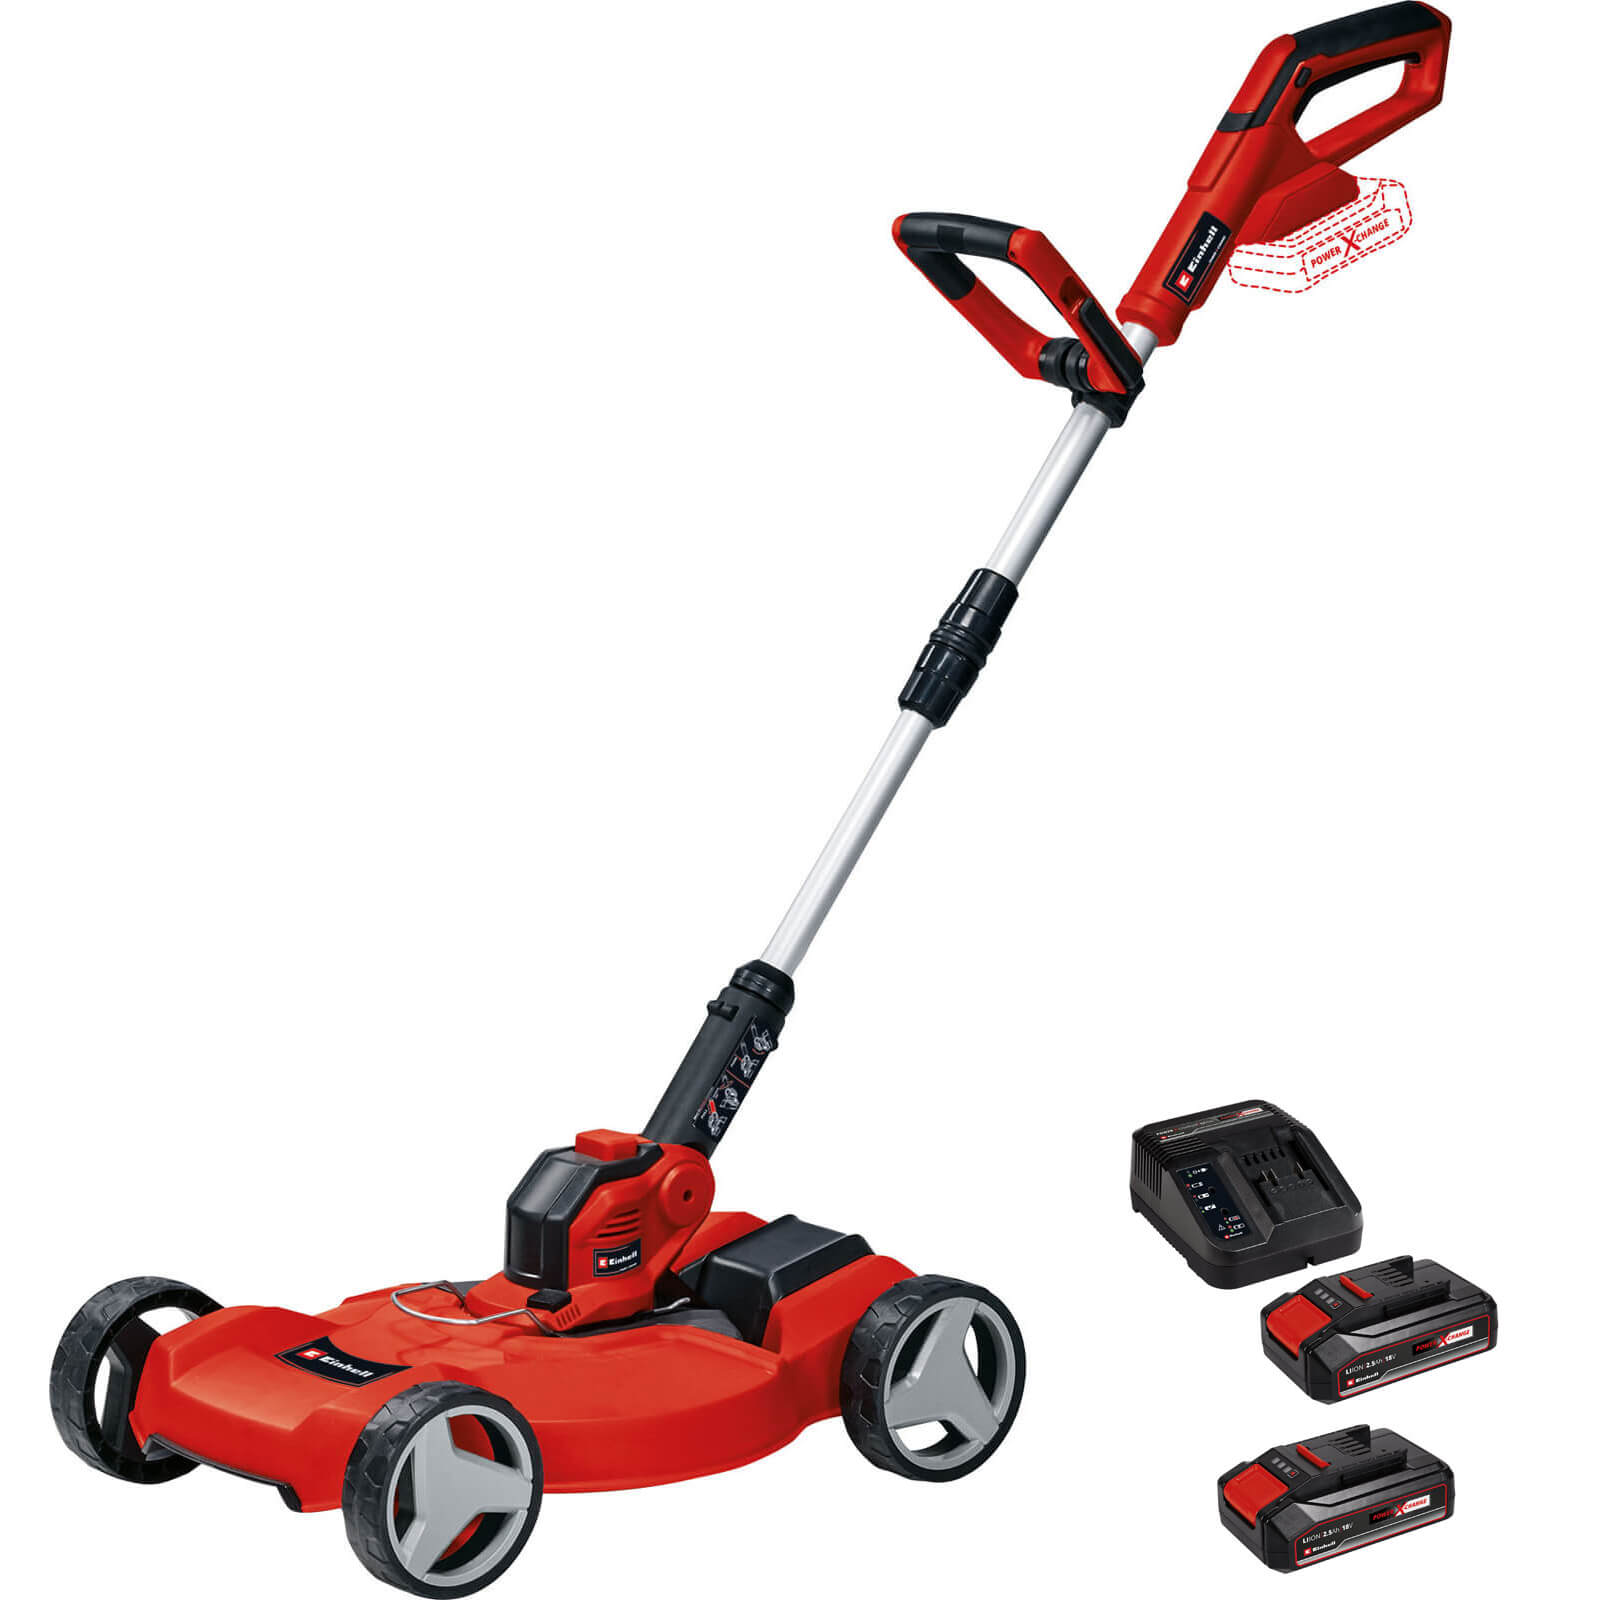 Image of Einhell GE-CT 18/28 Li TC 18v Cordless Grass Trimmer and Edger 280mm 2 x 2.5ah Li-ion Charger